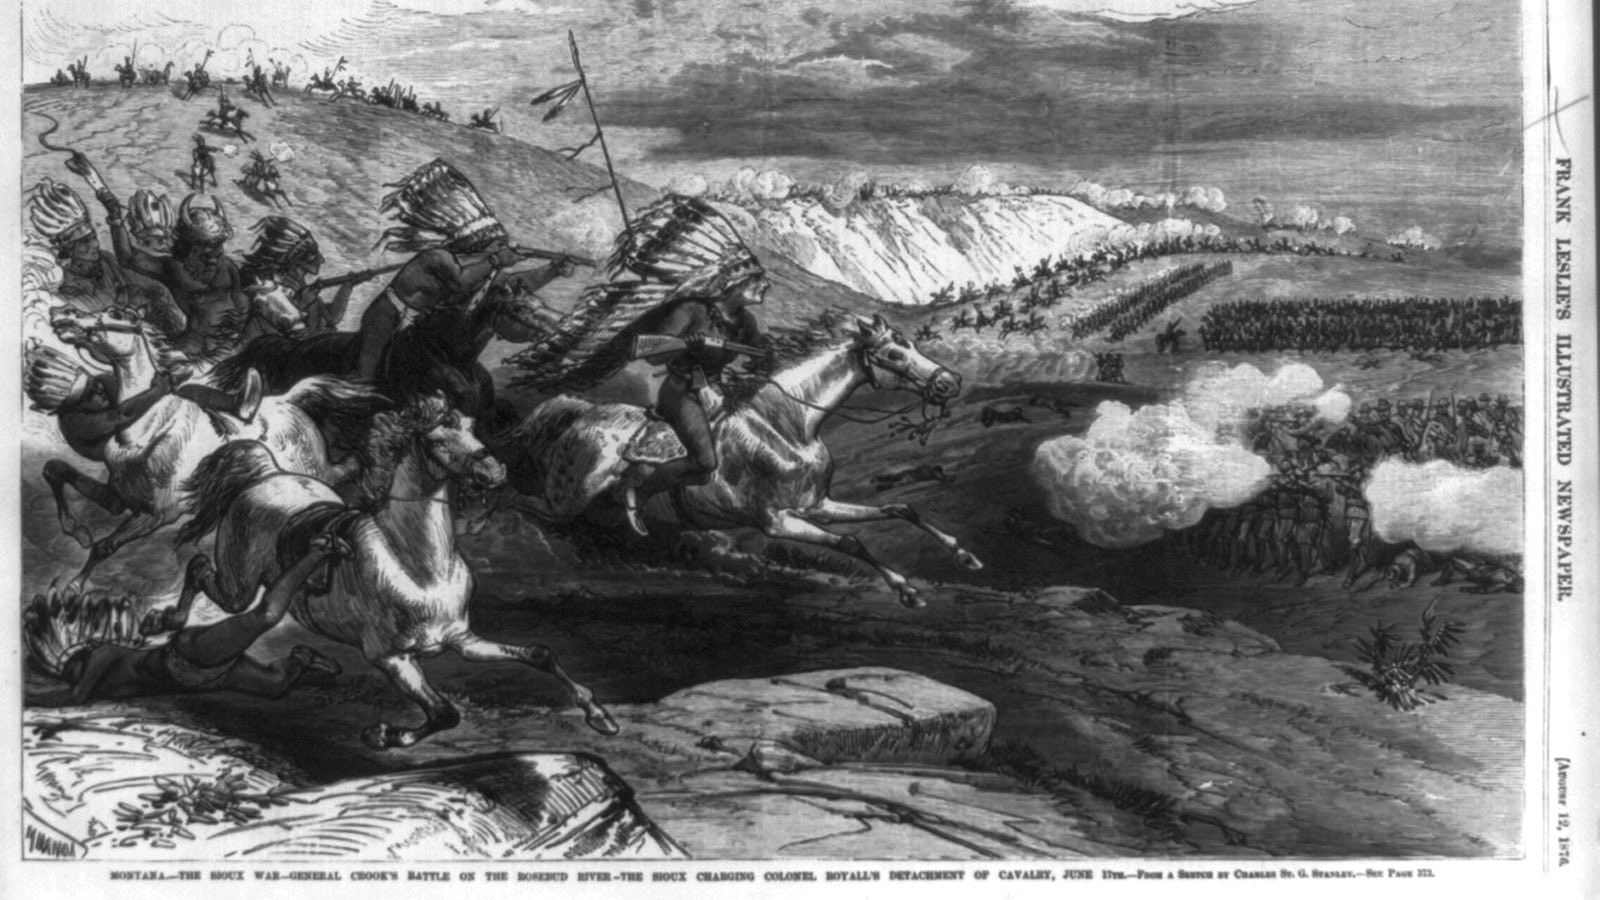 This wood engraving depicting Sioux warriors charging at the Battle of the Rosebud was printed in Frank Leslie's Illustrated Newspaper on Aug. 12, 1876.